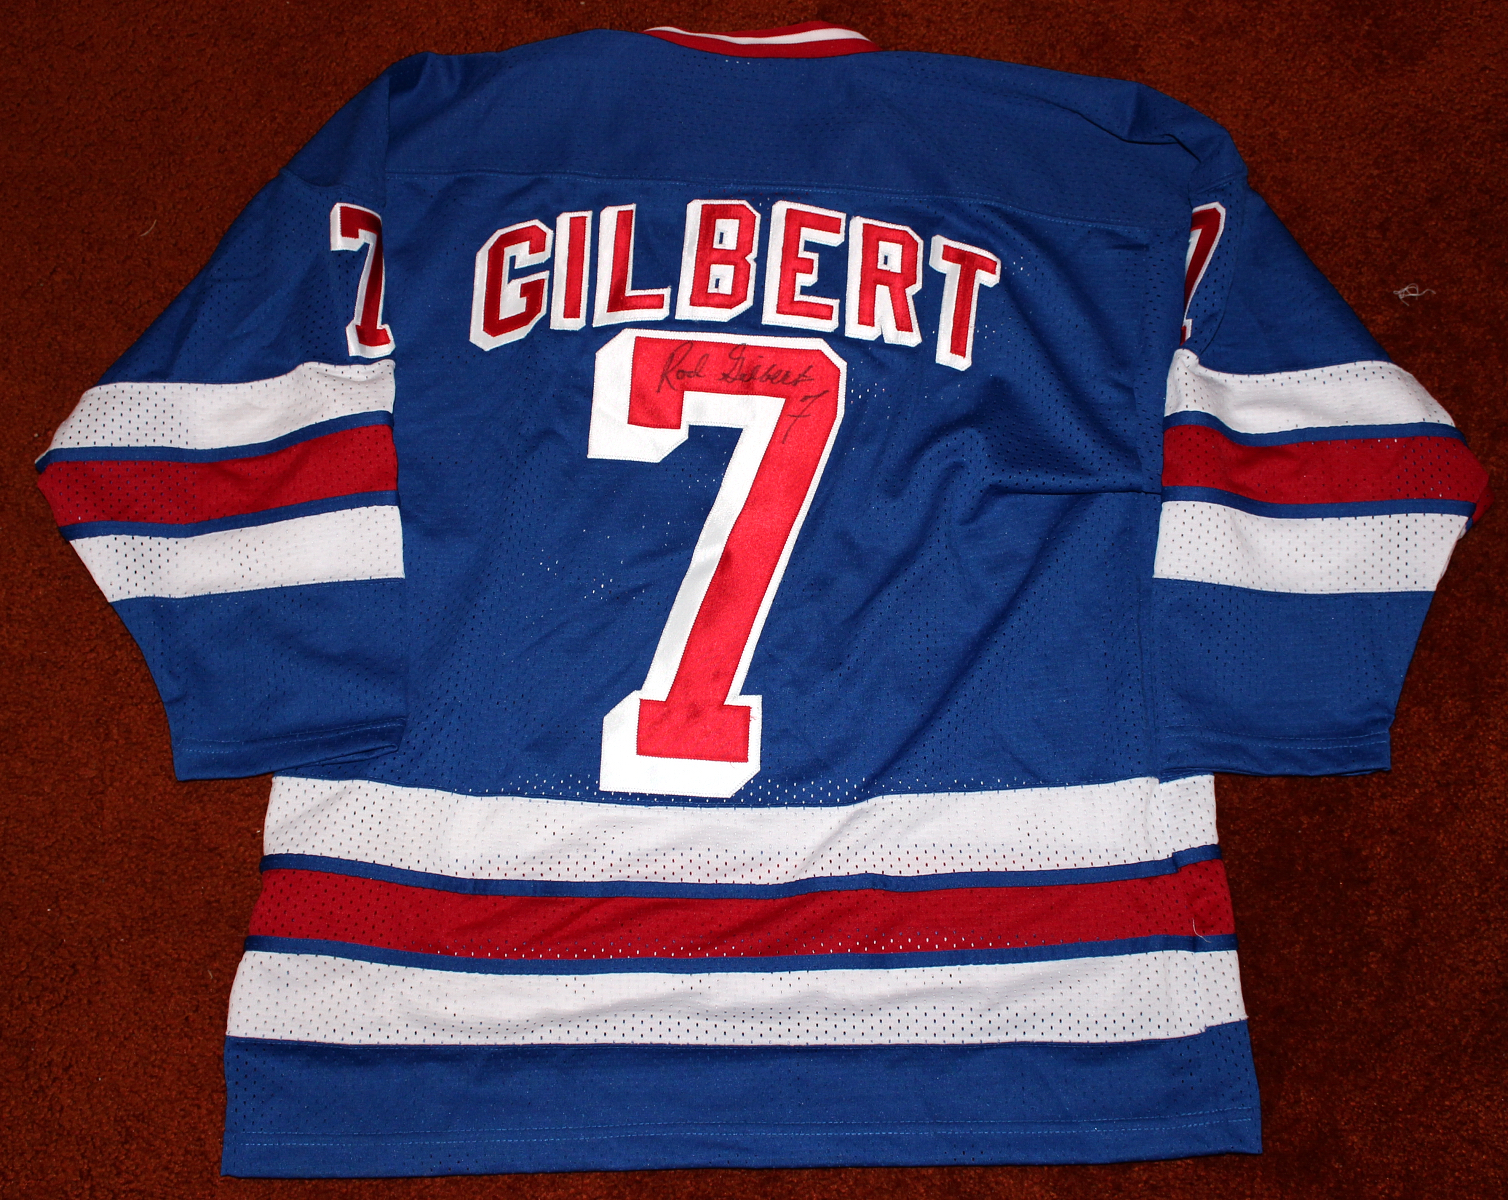 New York Rangers Signed Jerseys, Collectible Rangers Jerseys, New York  Rangers Memorabilia Jerseys